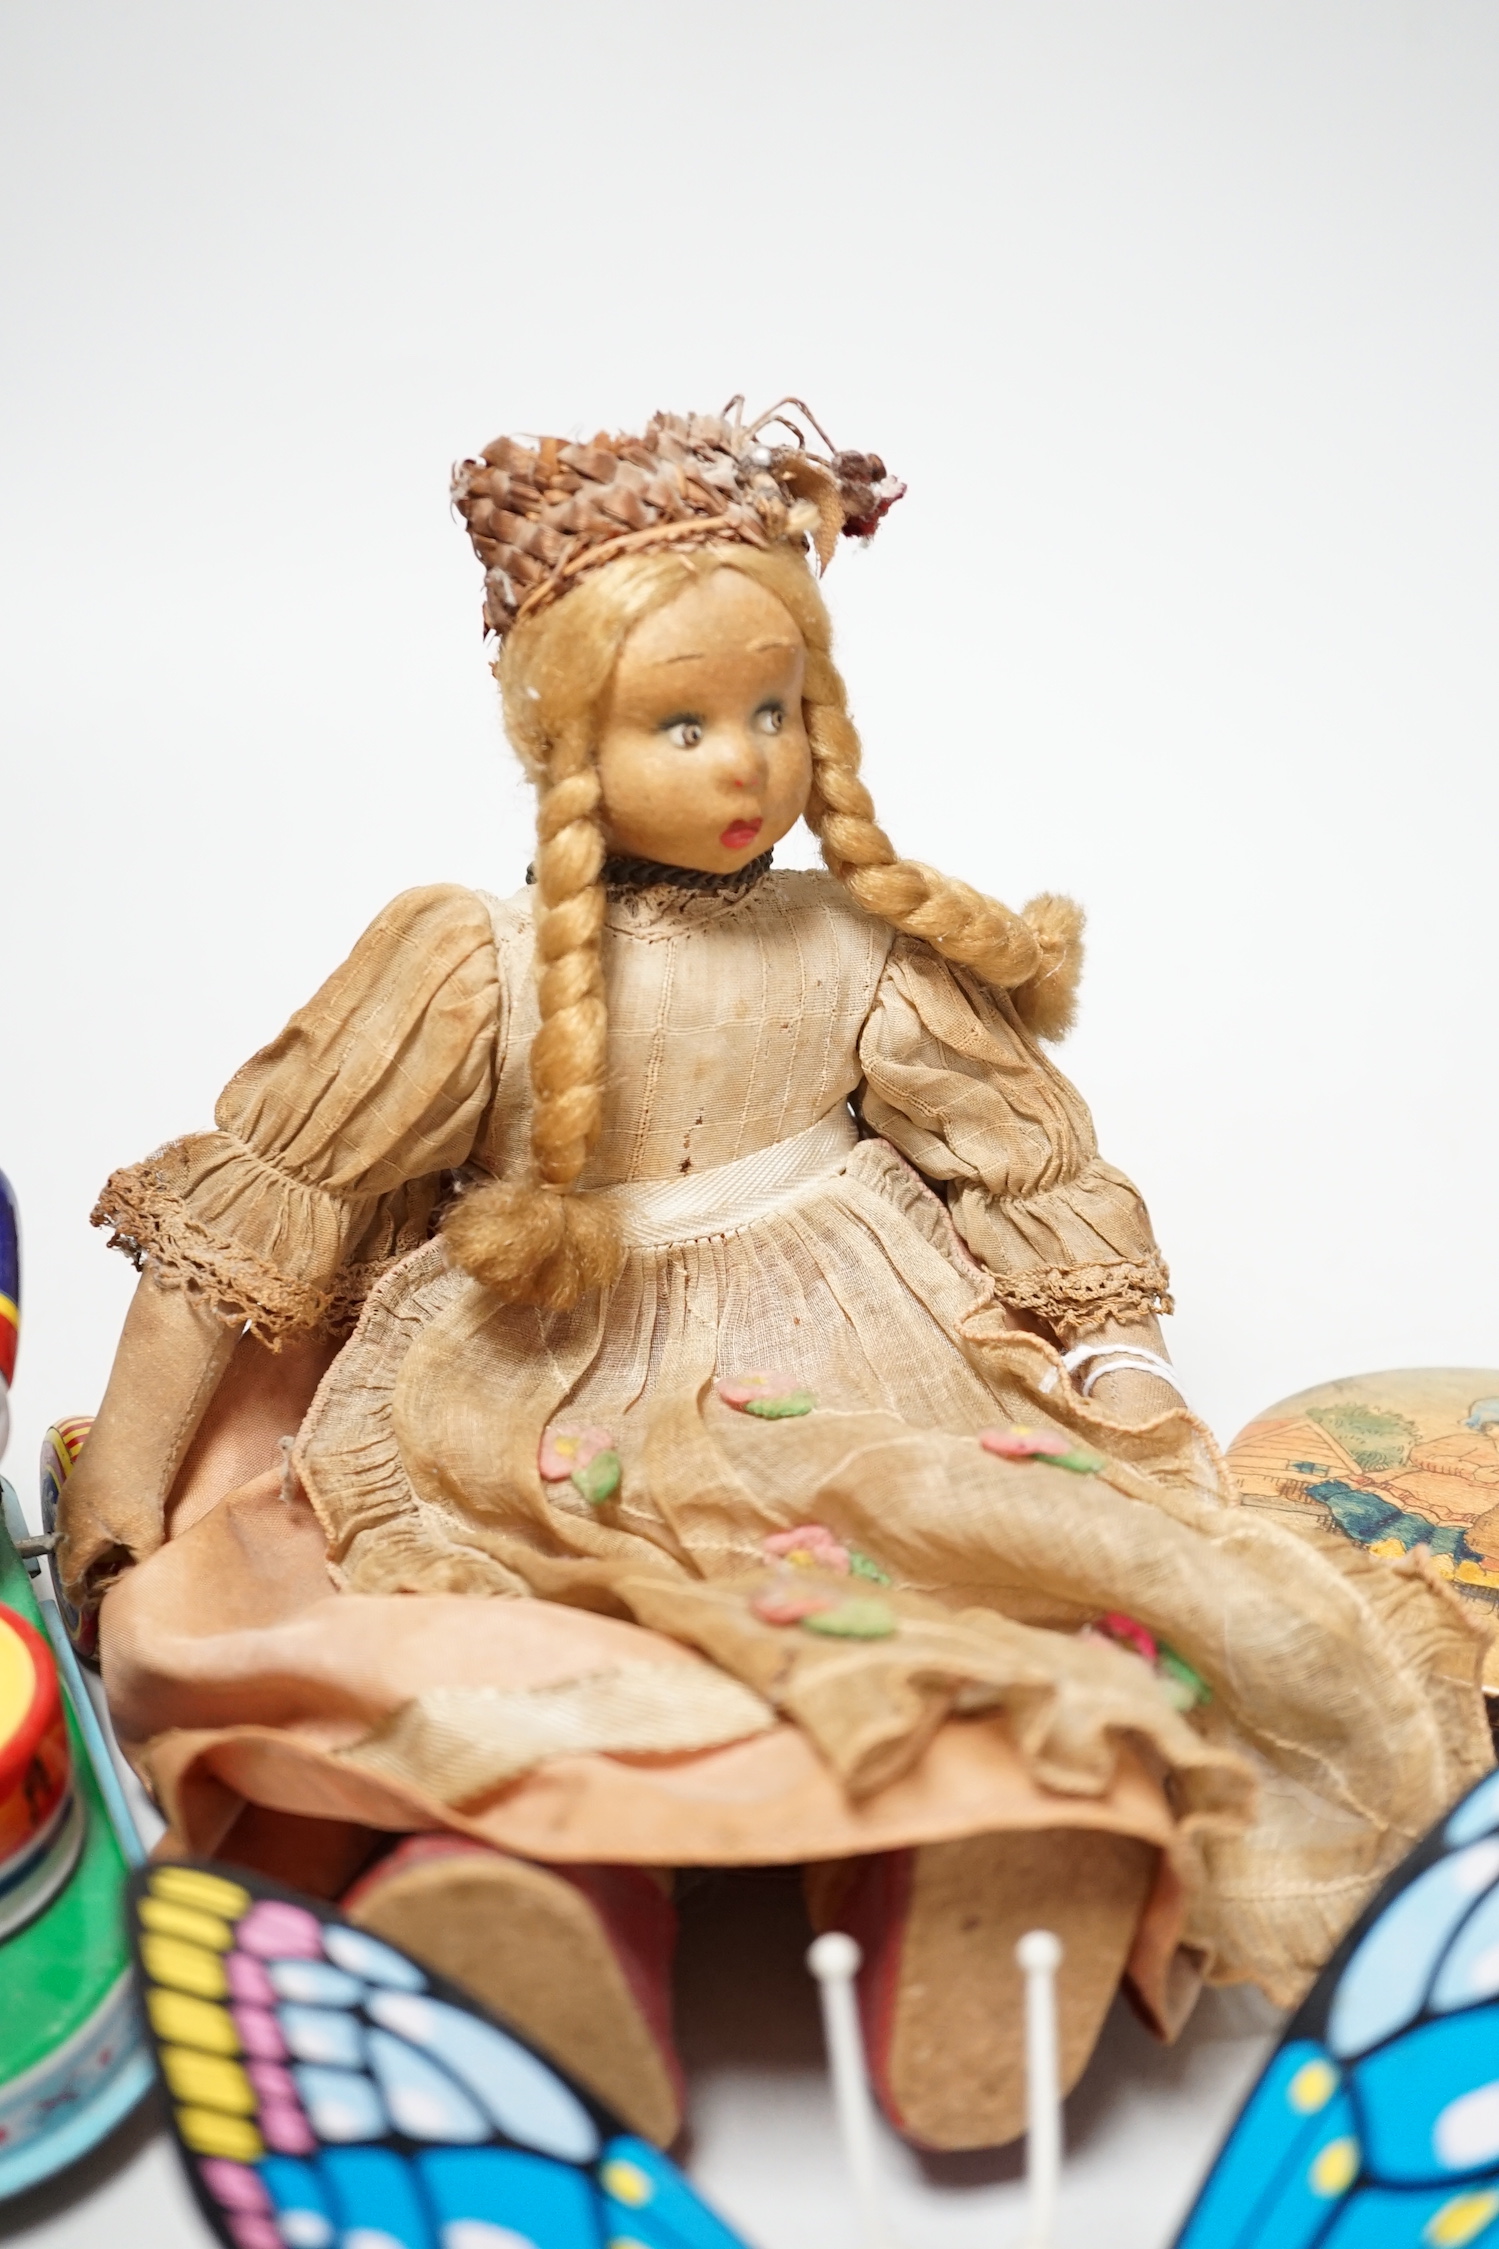 Two tin plate clockwork toys, a doll and a treen box